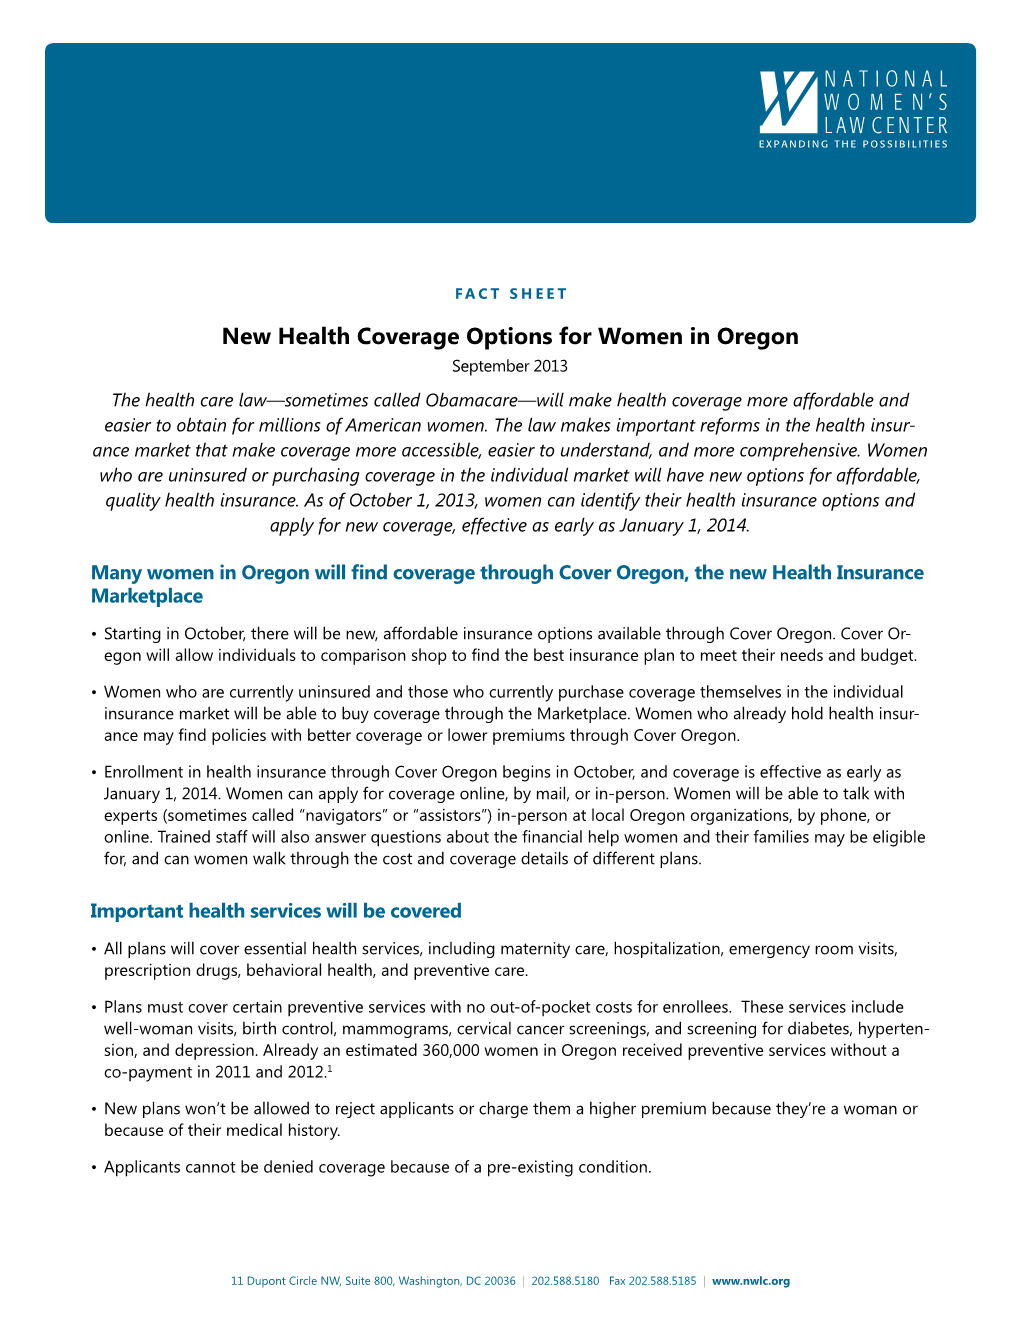 New Health Coverage Options for Women in Oregon